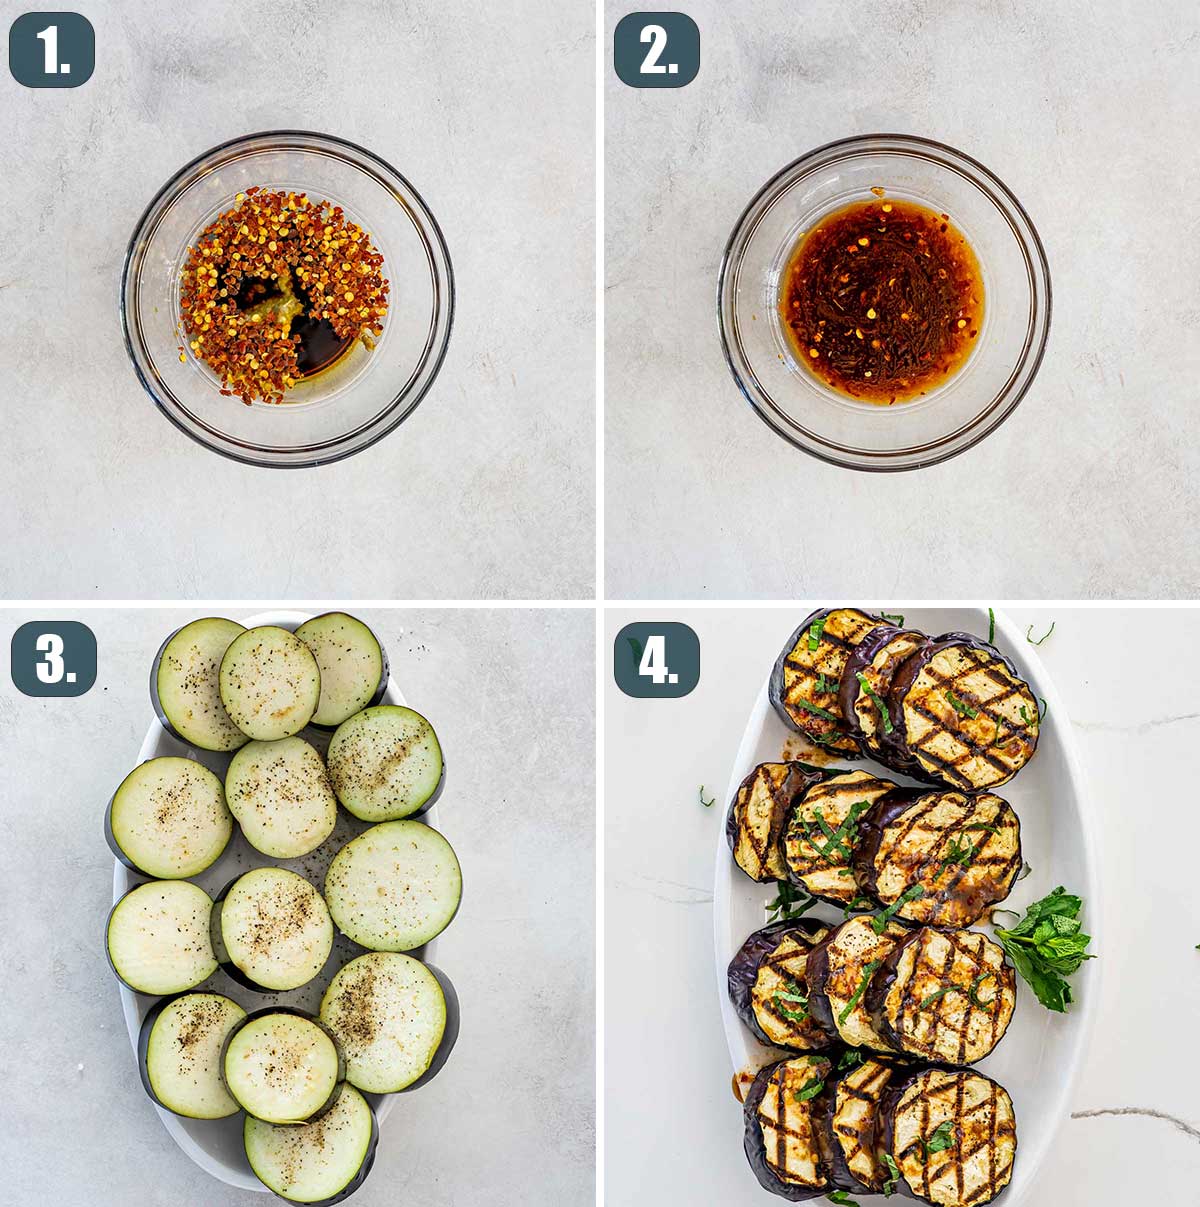 process shots showing how to make grilled eggplant with garlic mint sauce.